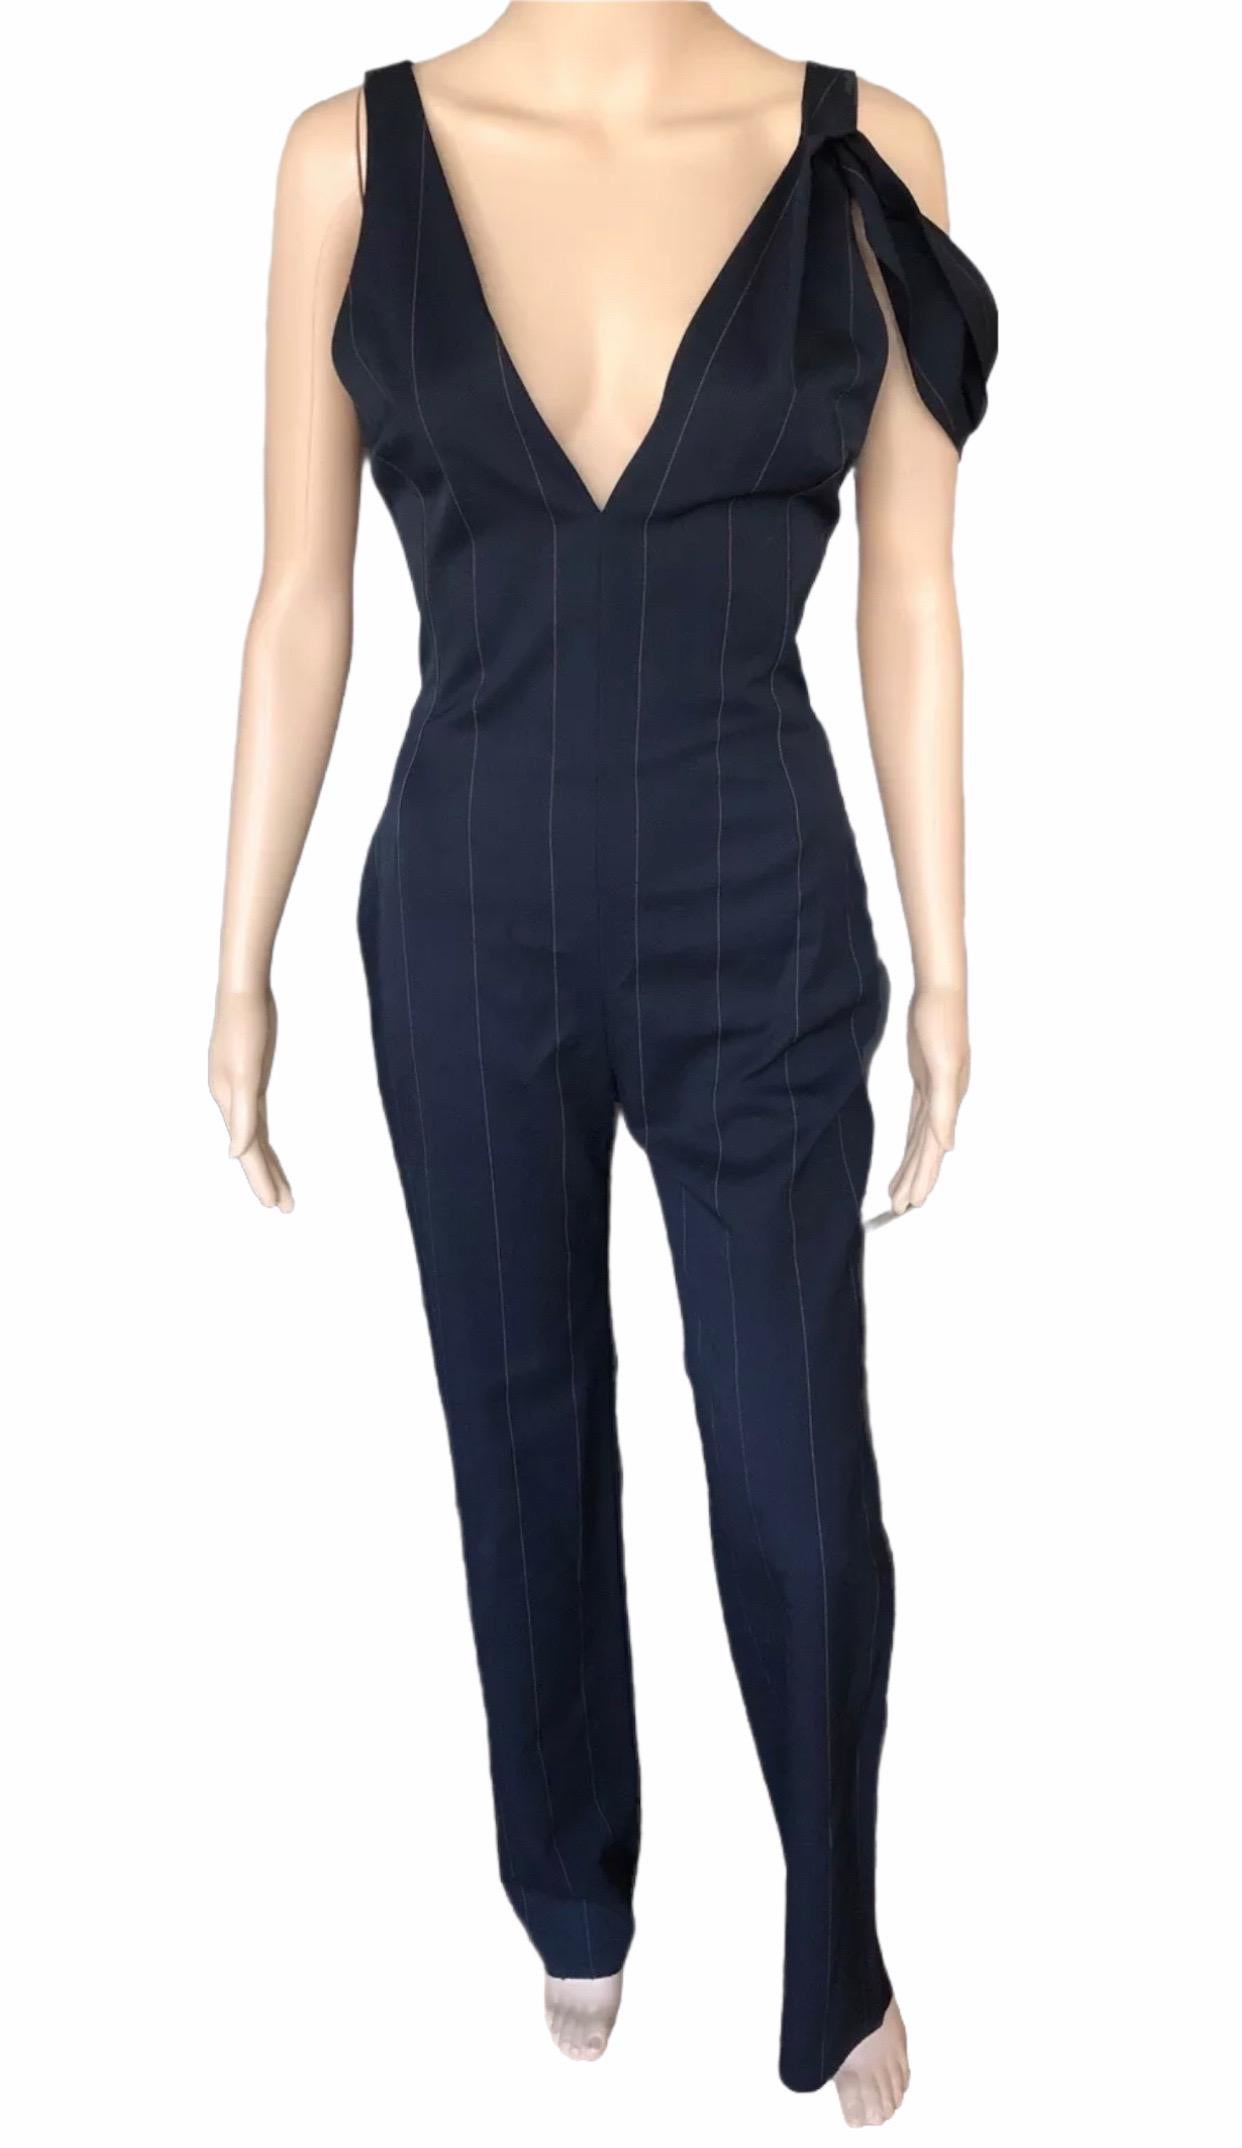 Gianni Versace F/W 1998 Vintage Pinstriped Plunging Open Back Jumpsuit In Good Condition For Sale In Naples, FL